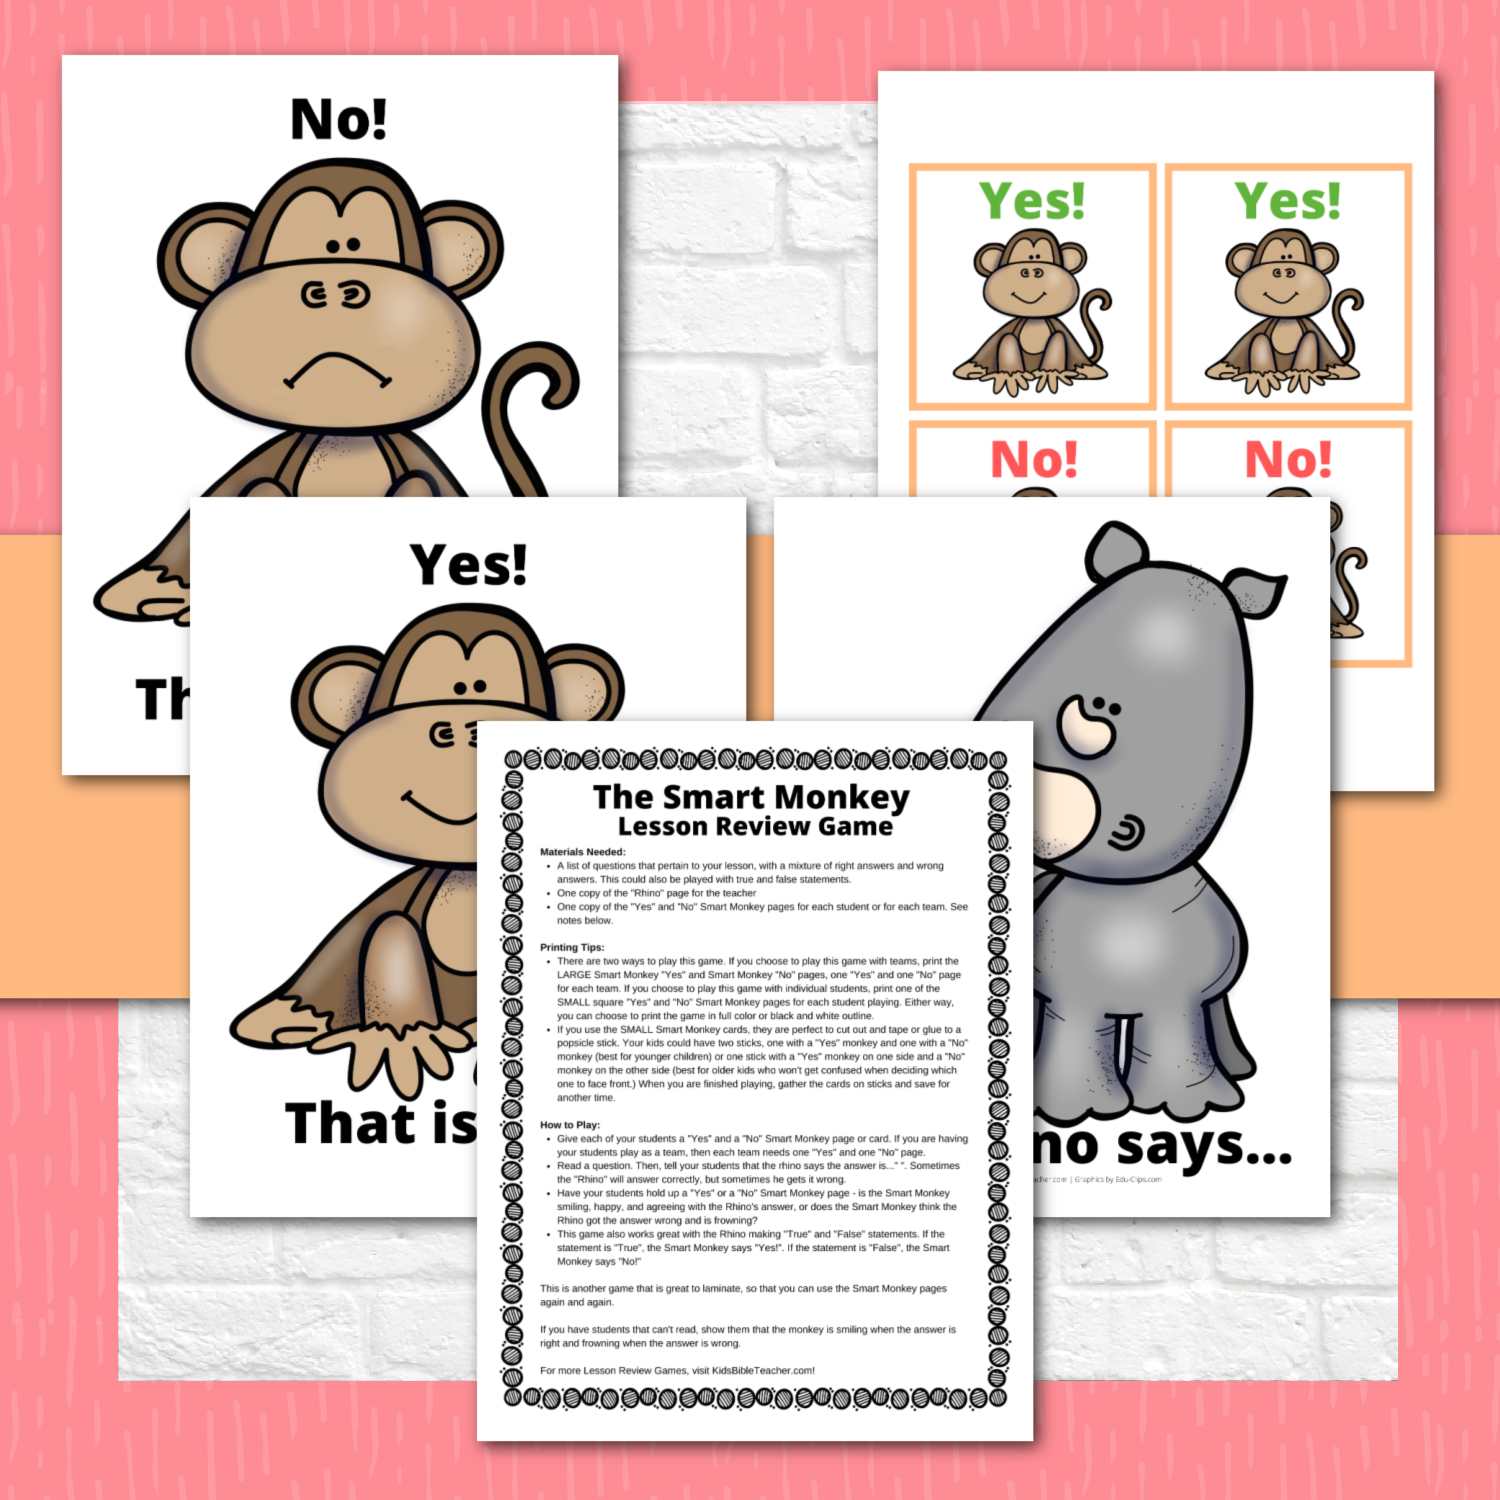 Smart Monkey Game for Studying Any Lesson - Lesson Review Bible Games for Youth